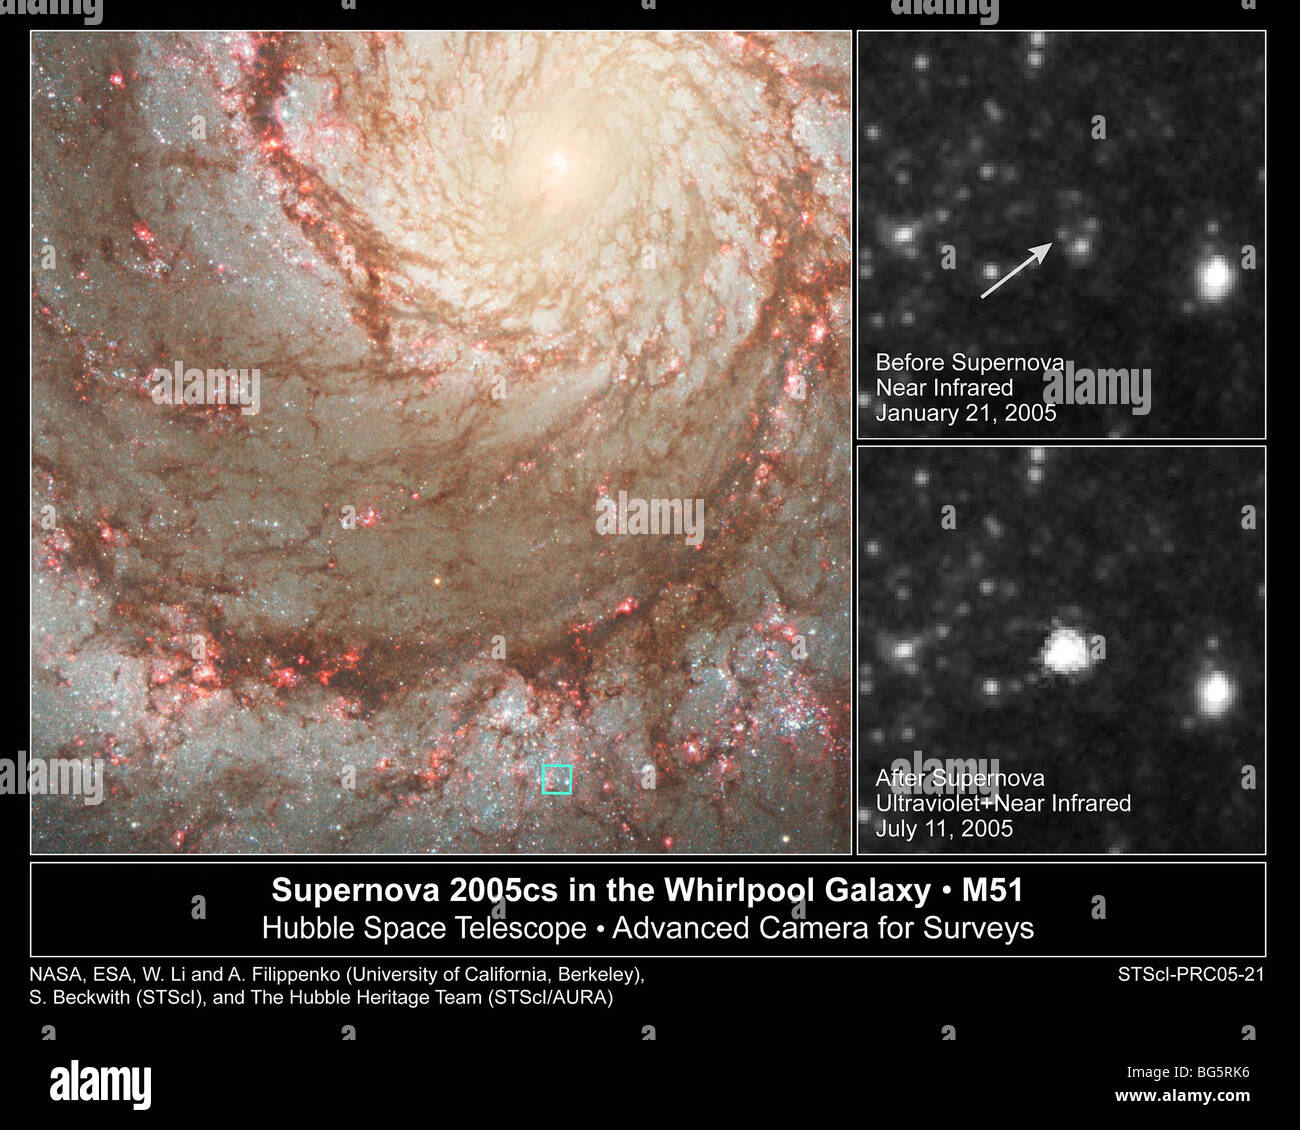 Supernova in the Whirlpool Galaxy M51 photographed by the Hubble Space Telescope including before and after inset pictures. Stock Photo